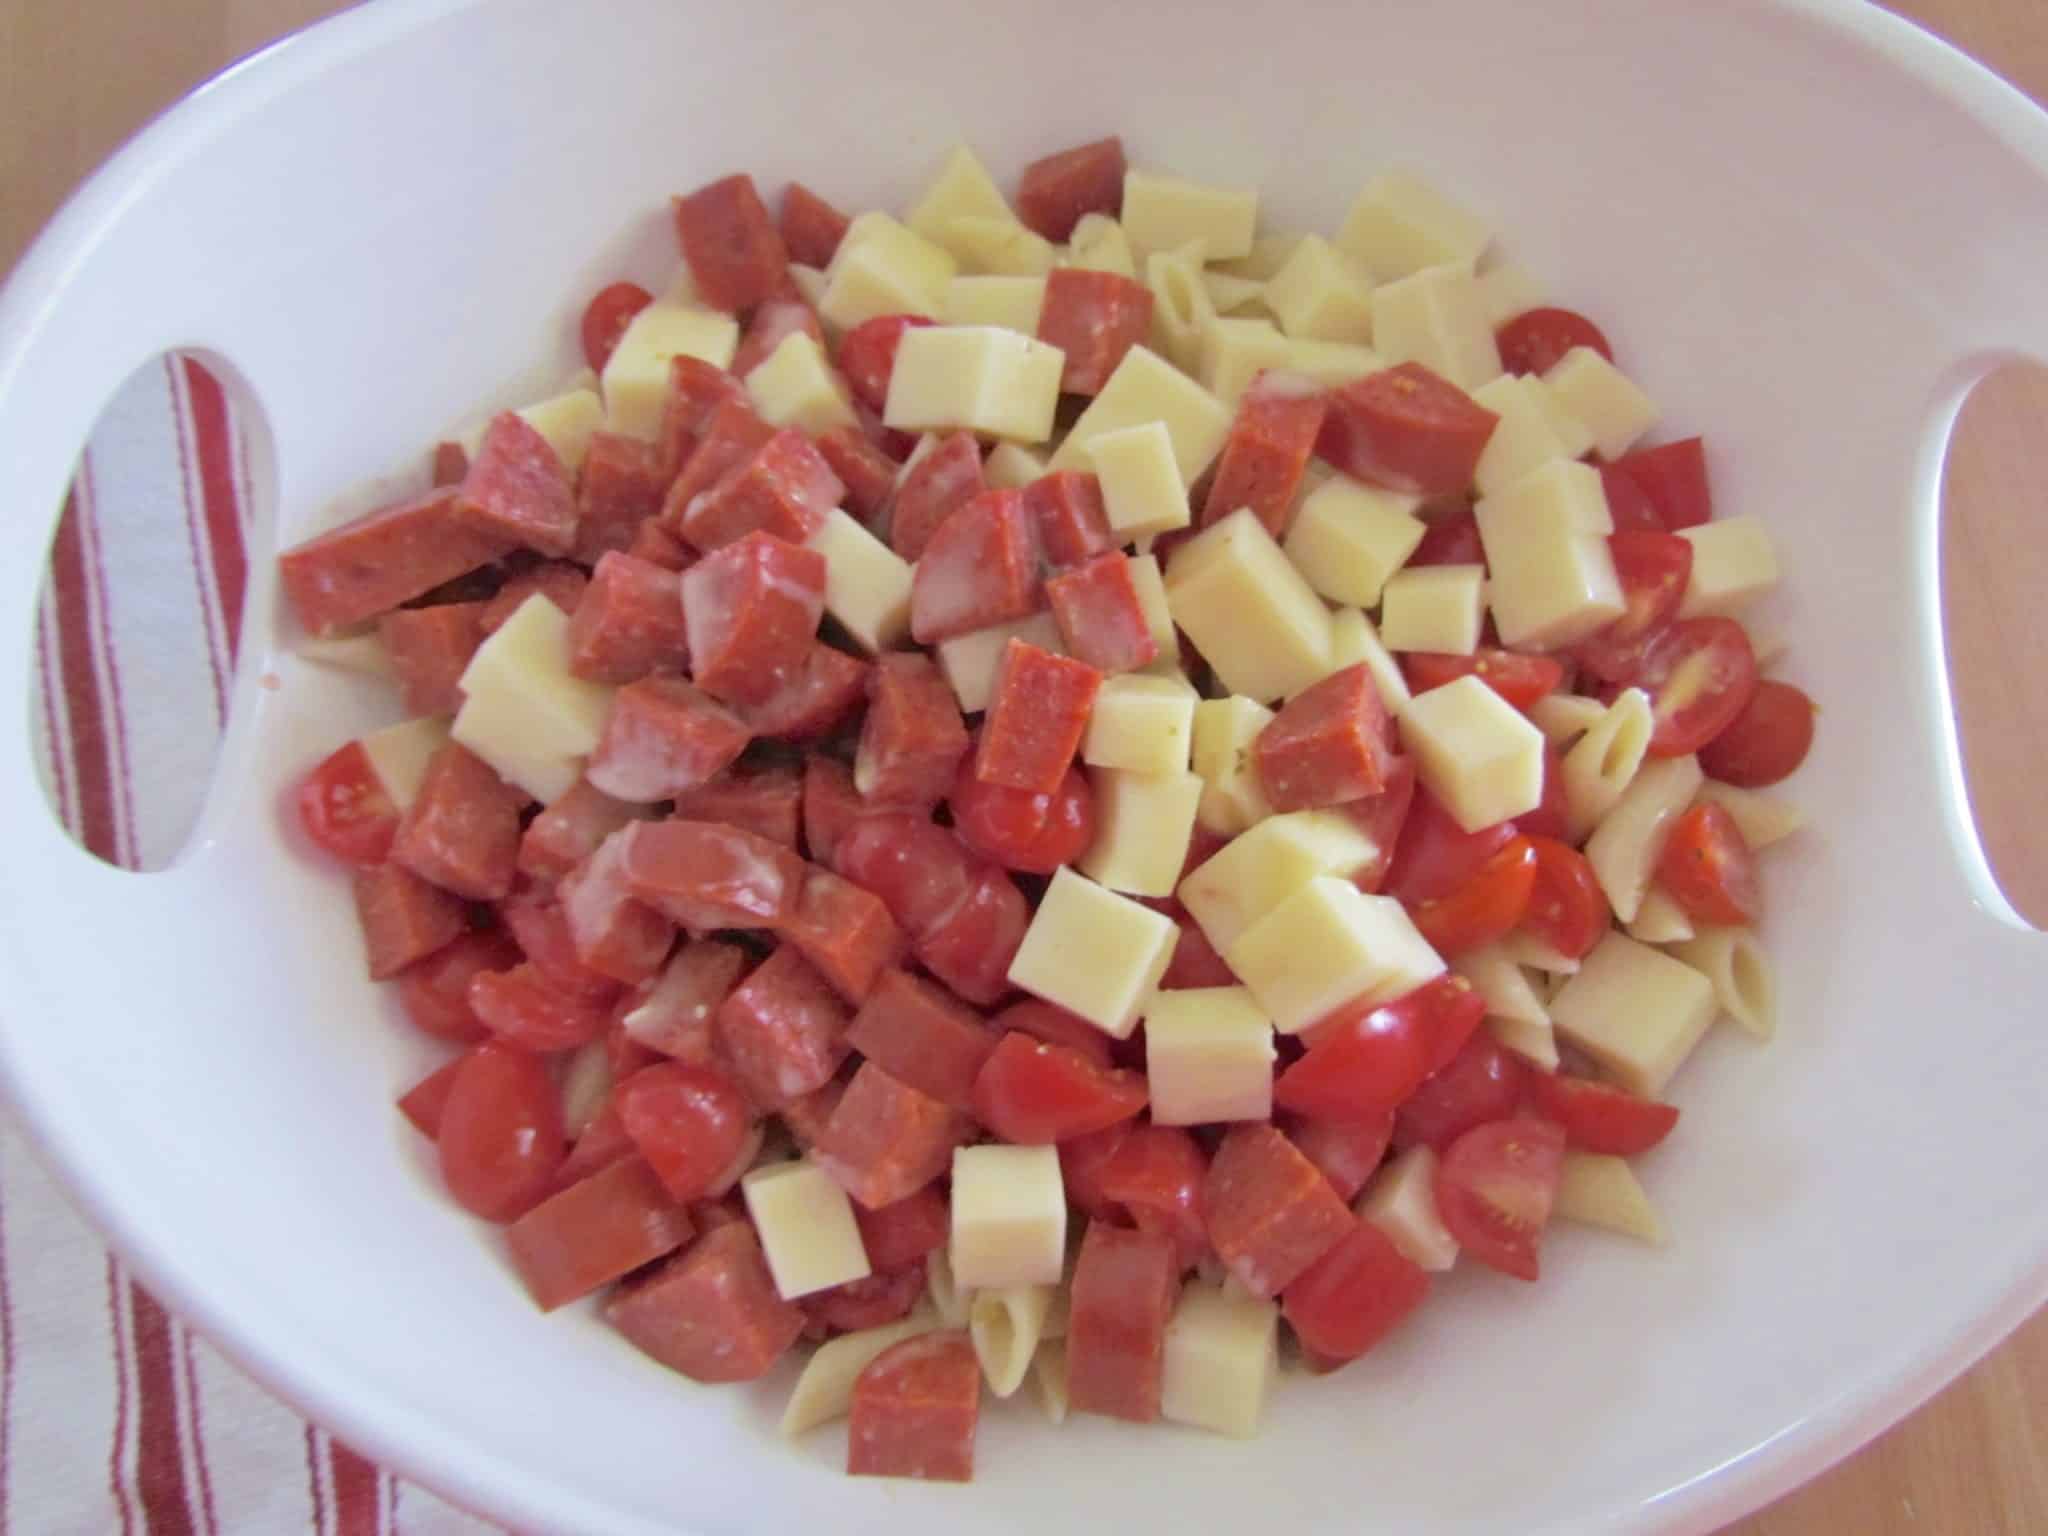 cooled penne pasta, diced mozarella, sliced tomatoes and diced pepperoni in a large bowl.